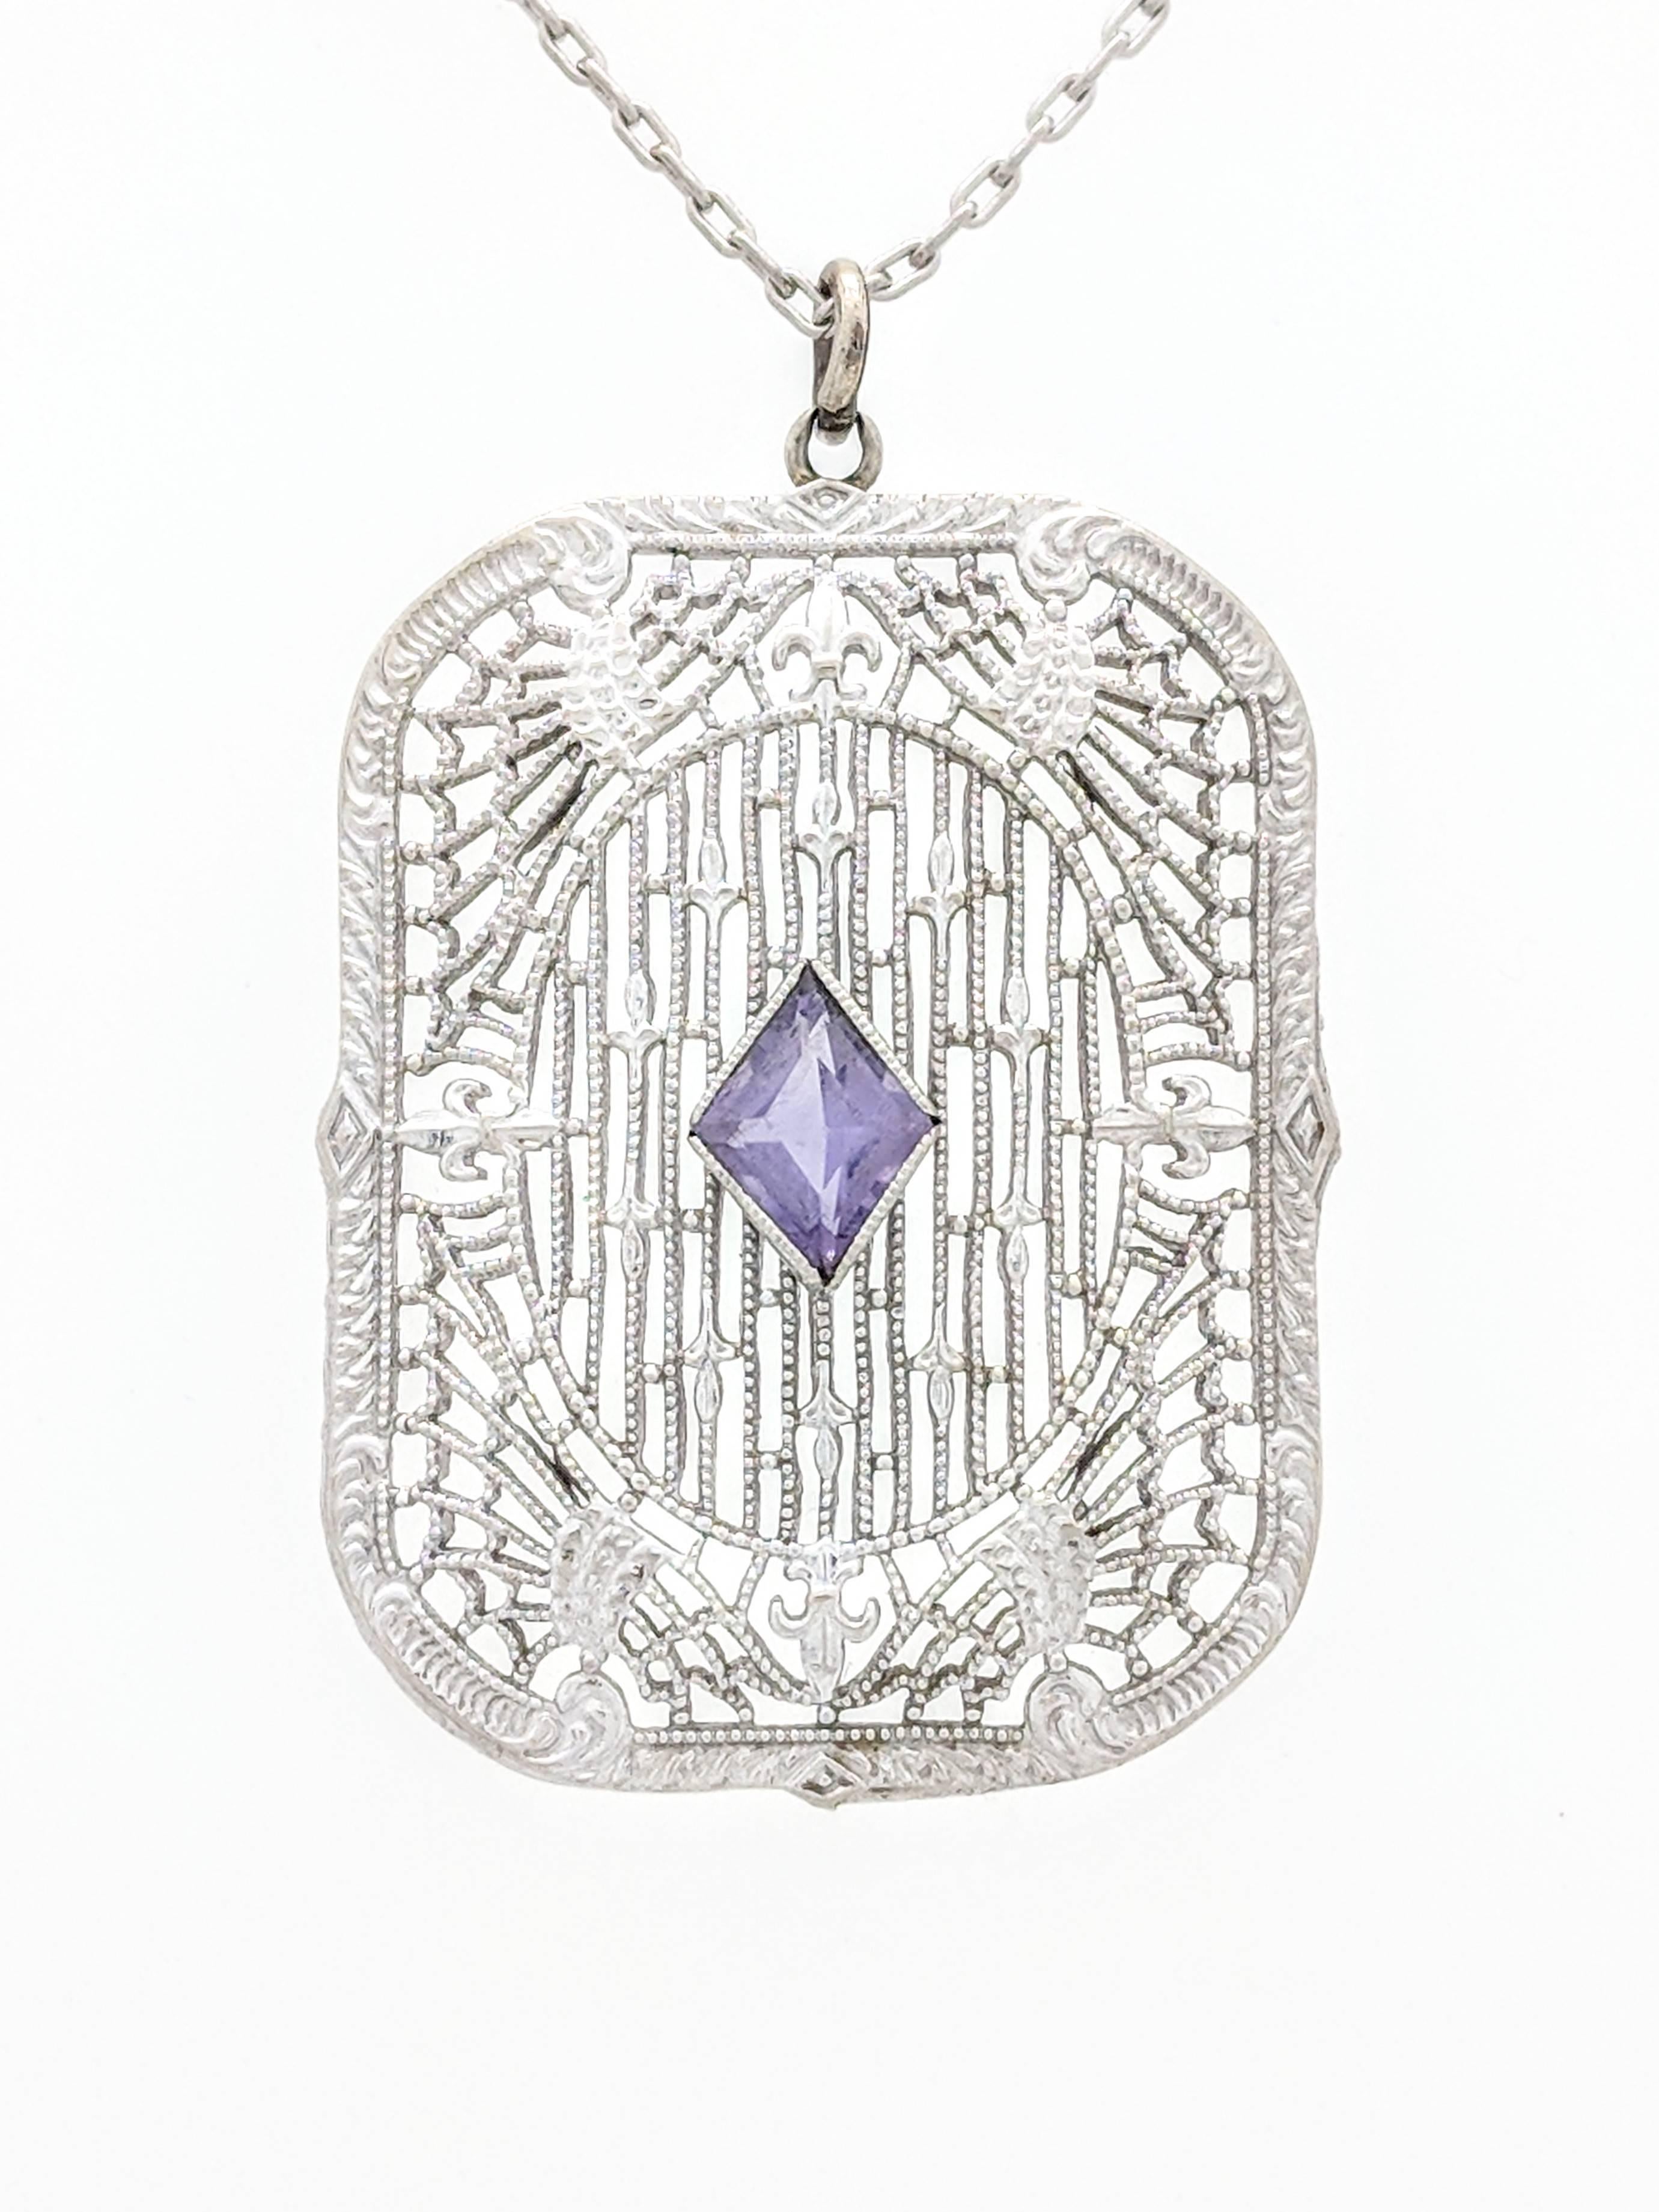 14 Karat White Gold Art Deco Amethyst Pendant Necklace In Excellent Condition For Sale In Gainesville, FL